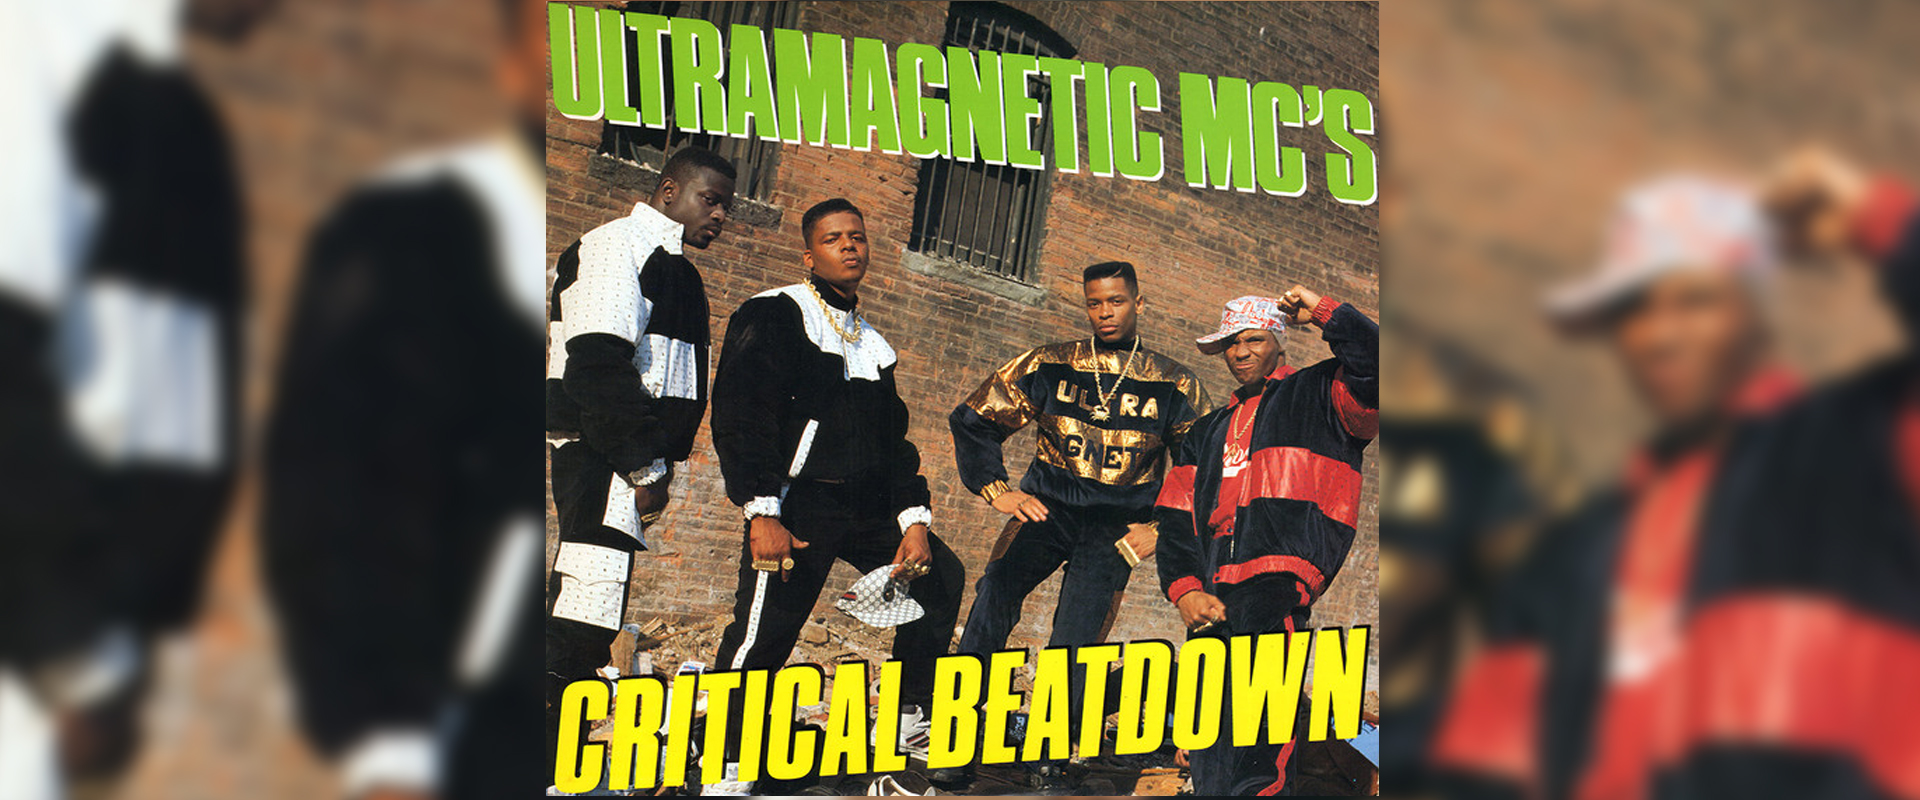 'Critical Beatdown' By The Ultramagnetic MC's At 35